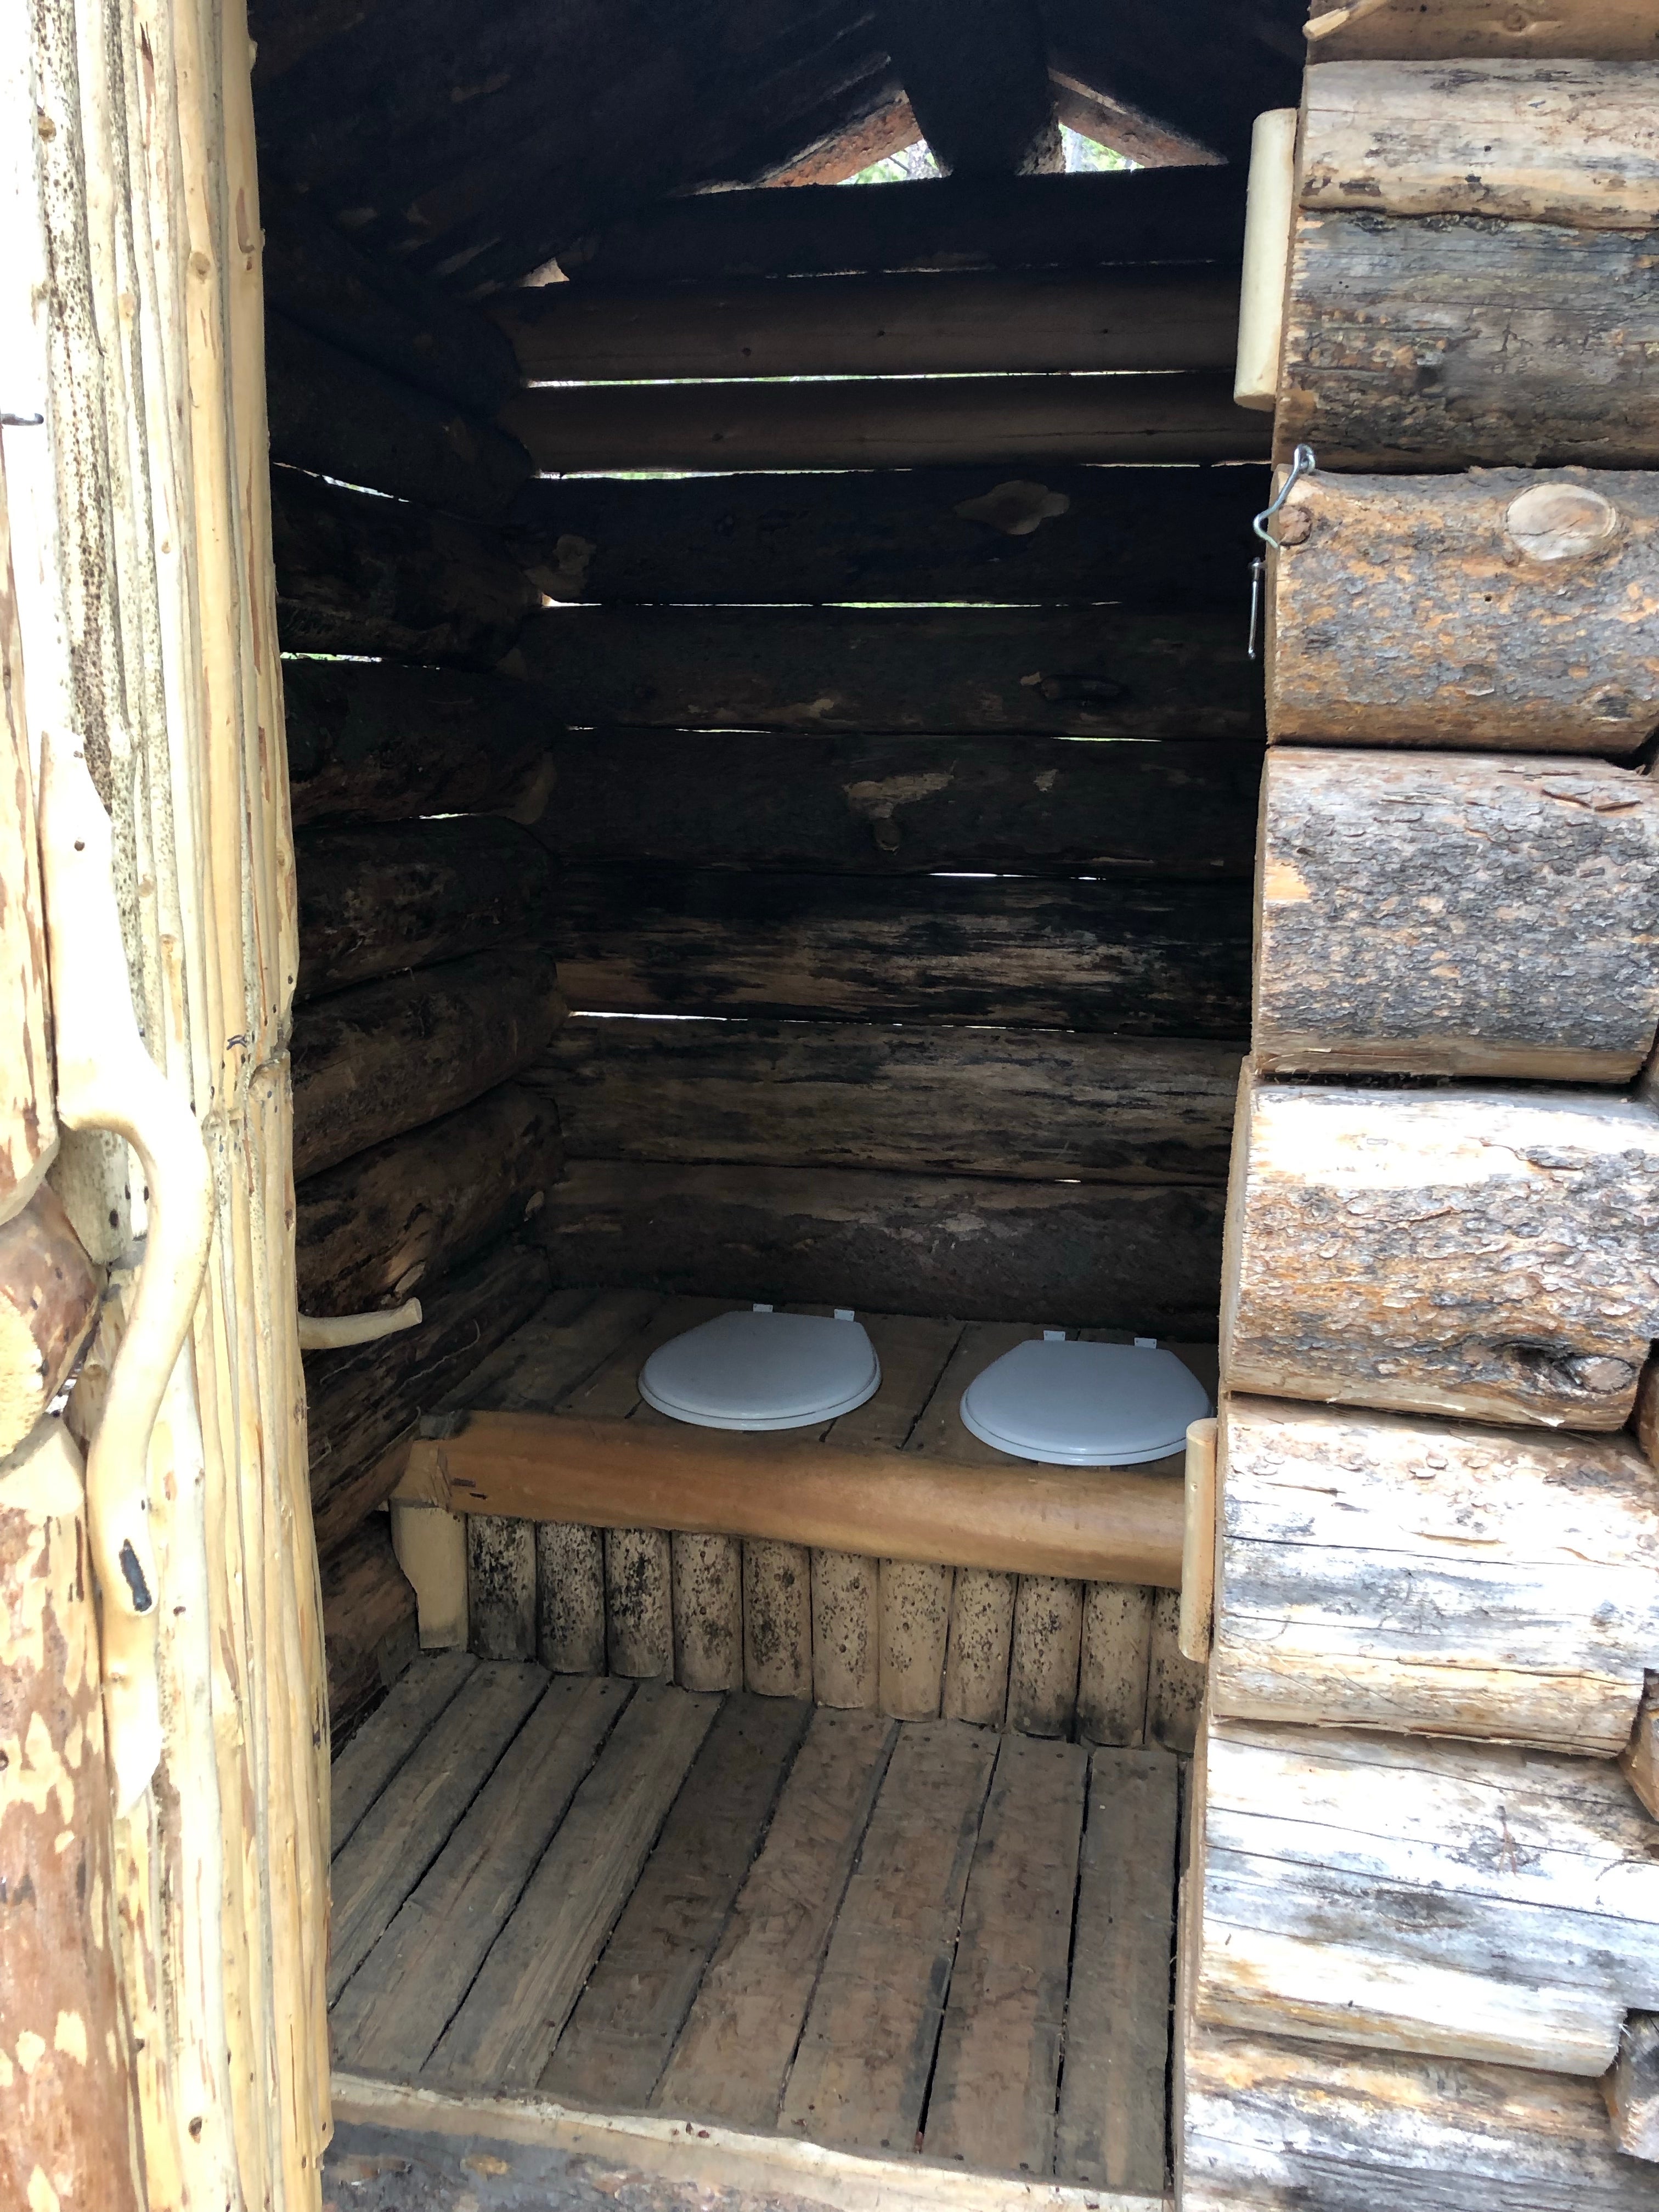 Camper submitted image from Mary Mountain Backcountry Patrol Cabin — Yellowstone National Park - 2